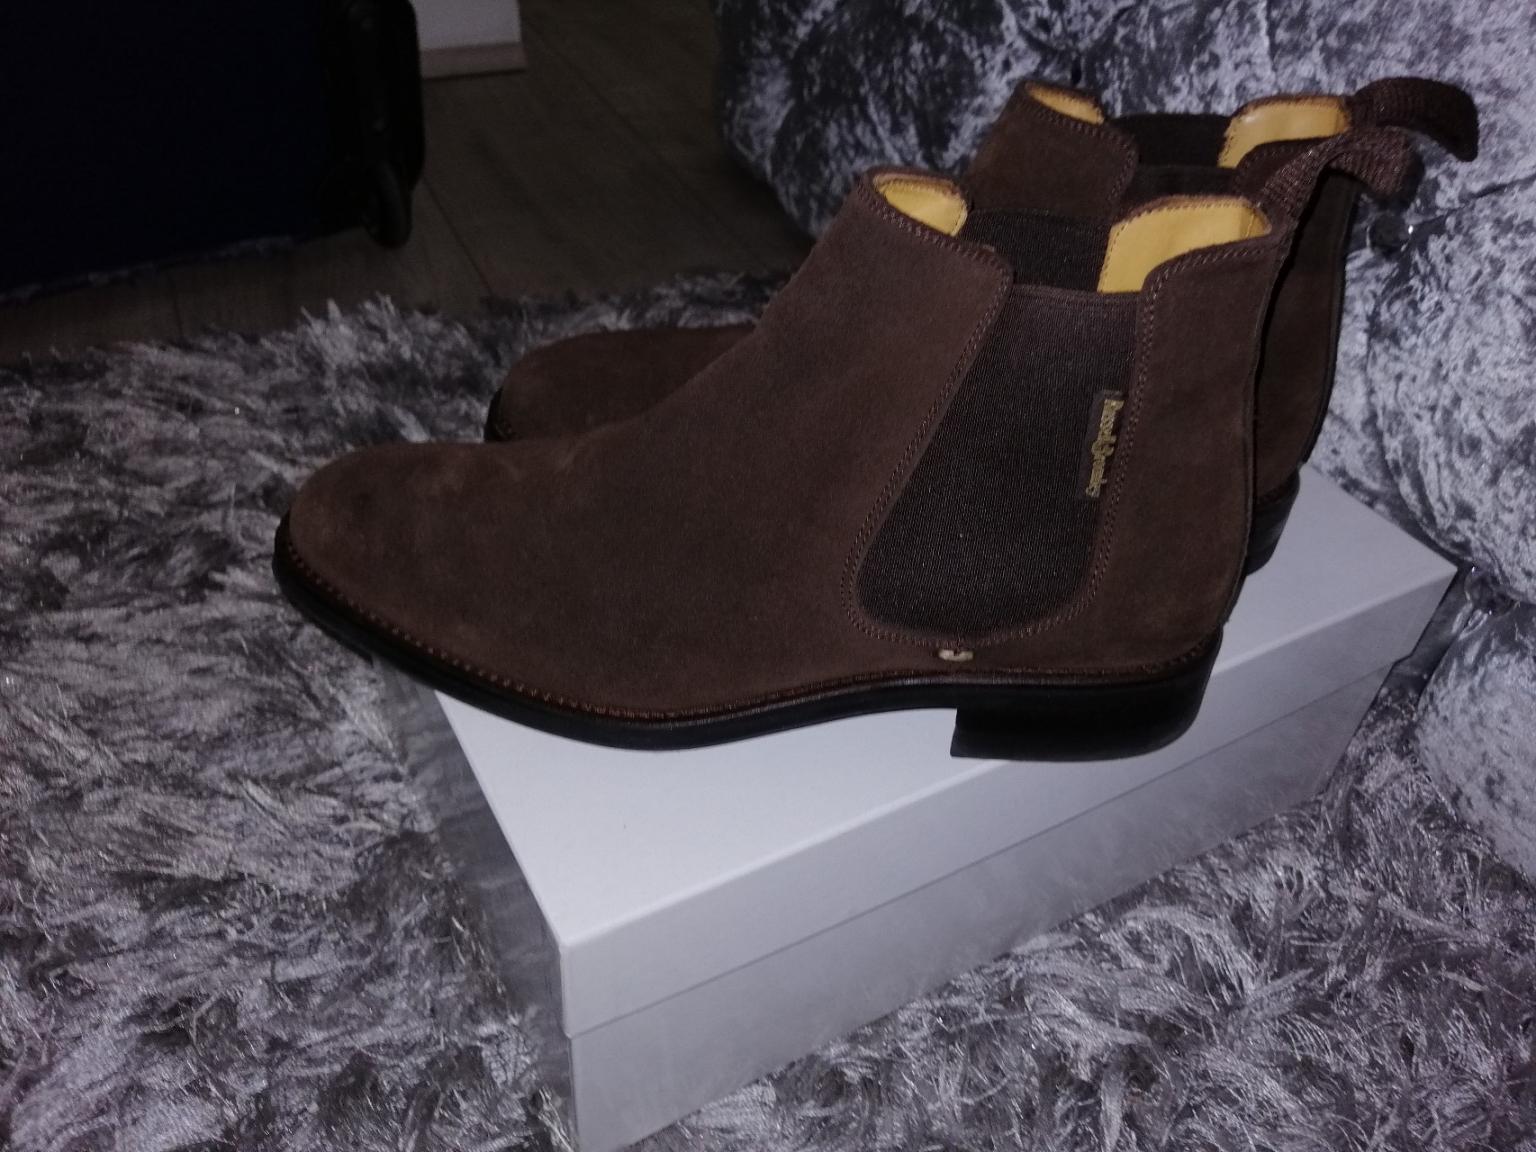 russell and bromley chelsea boots mens